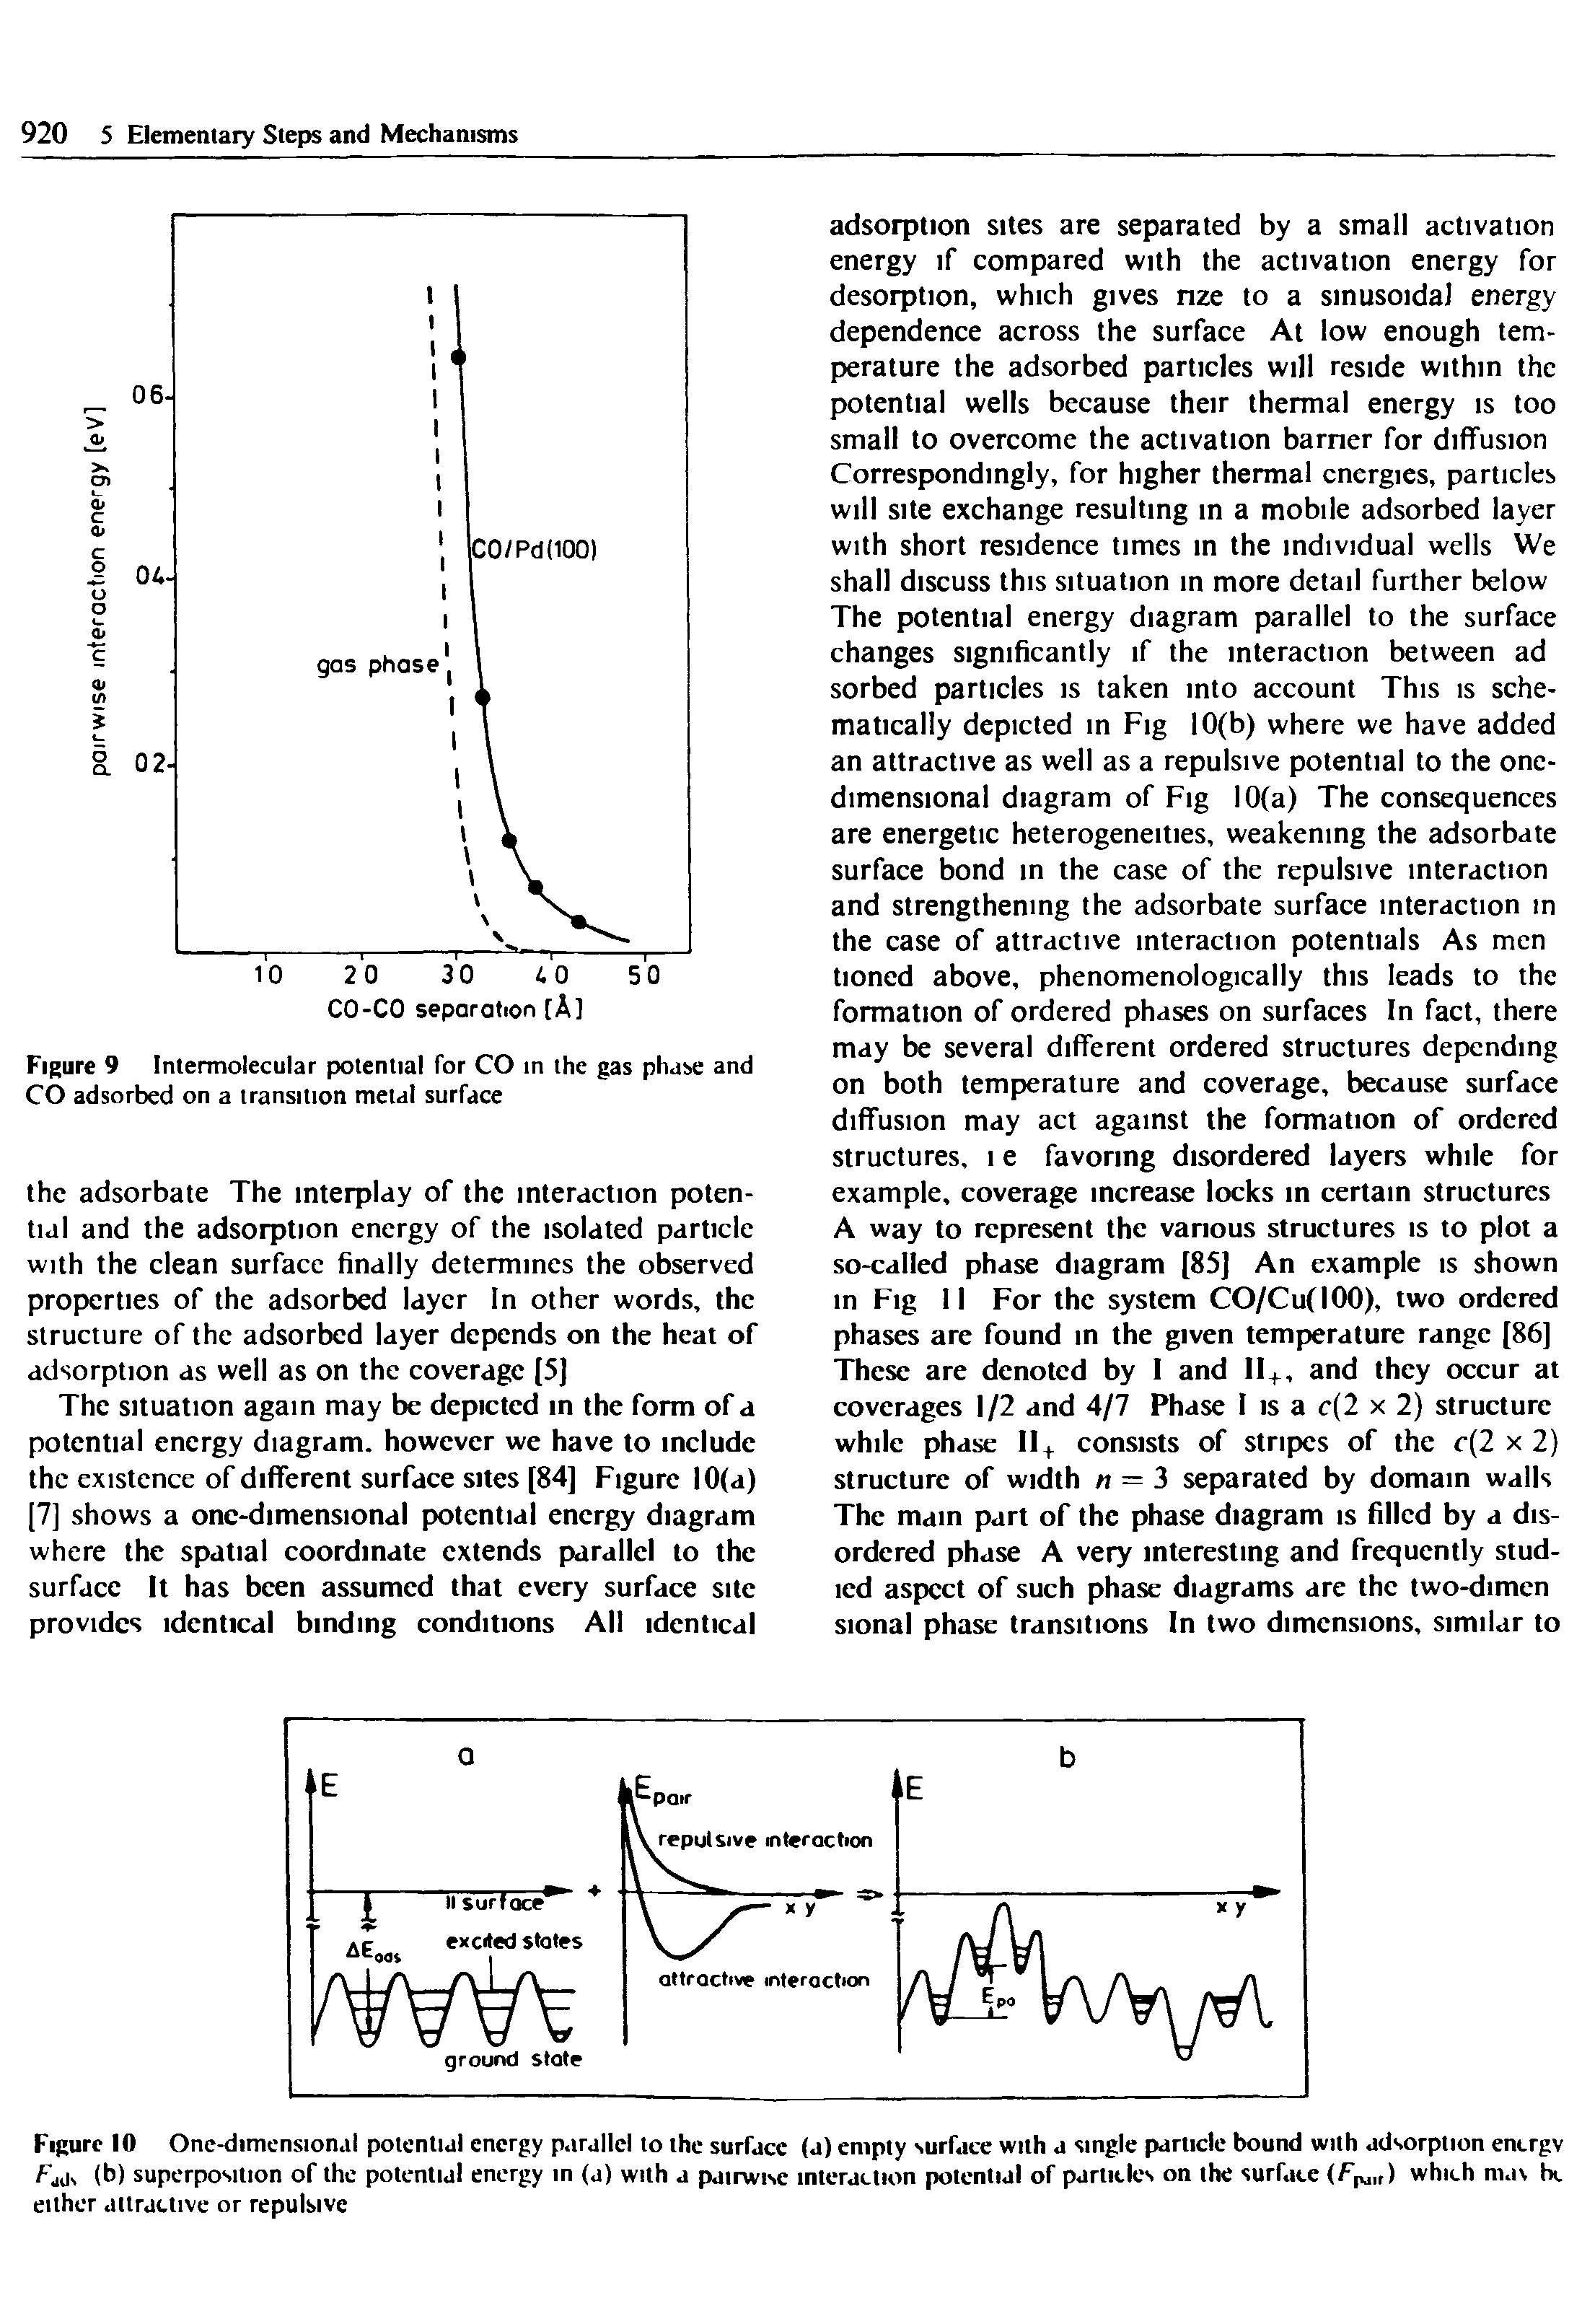 Figure 10 One-dimensional potential energy parallel to the surface (a) empty surface with a single particle bound with adsorption energy FjiK (b) superposition of the potential energy in (a) with a pairwise interaction potential of partitles on the surface (/>, ) which nia be either attractive or repulsive...